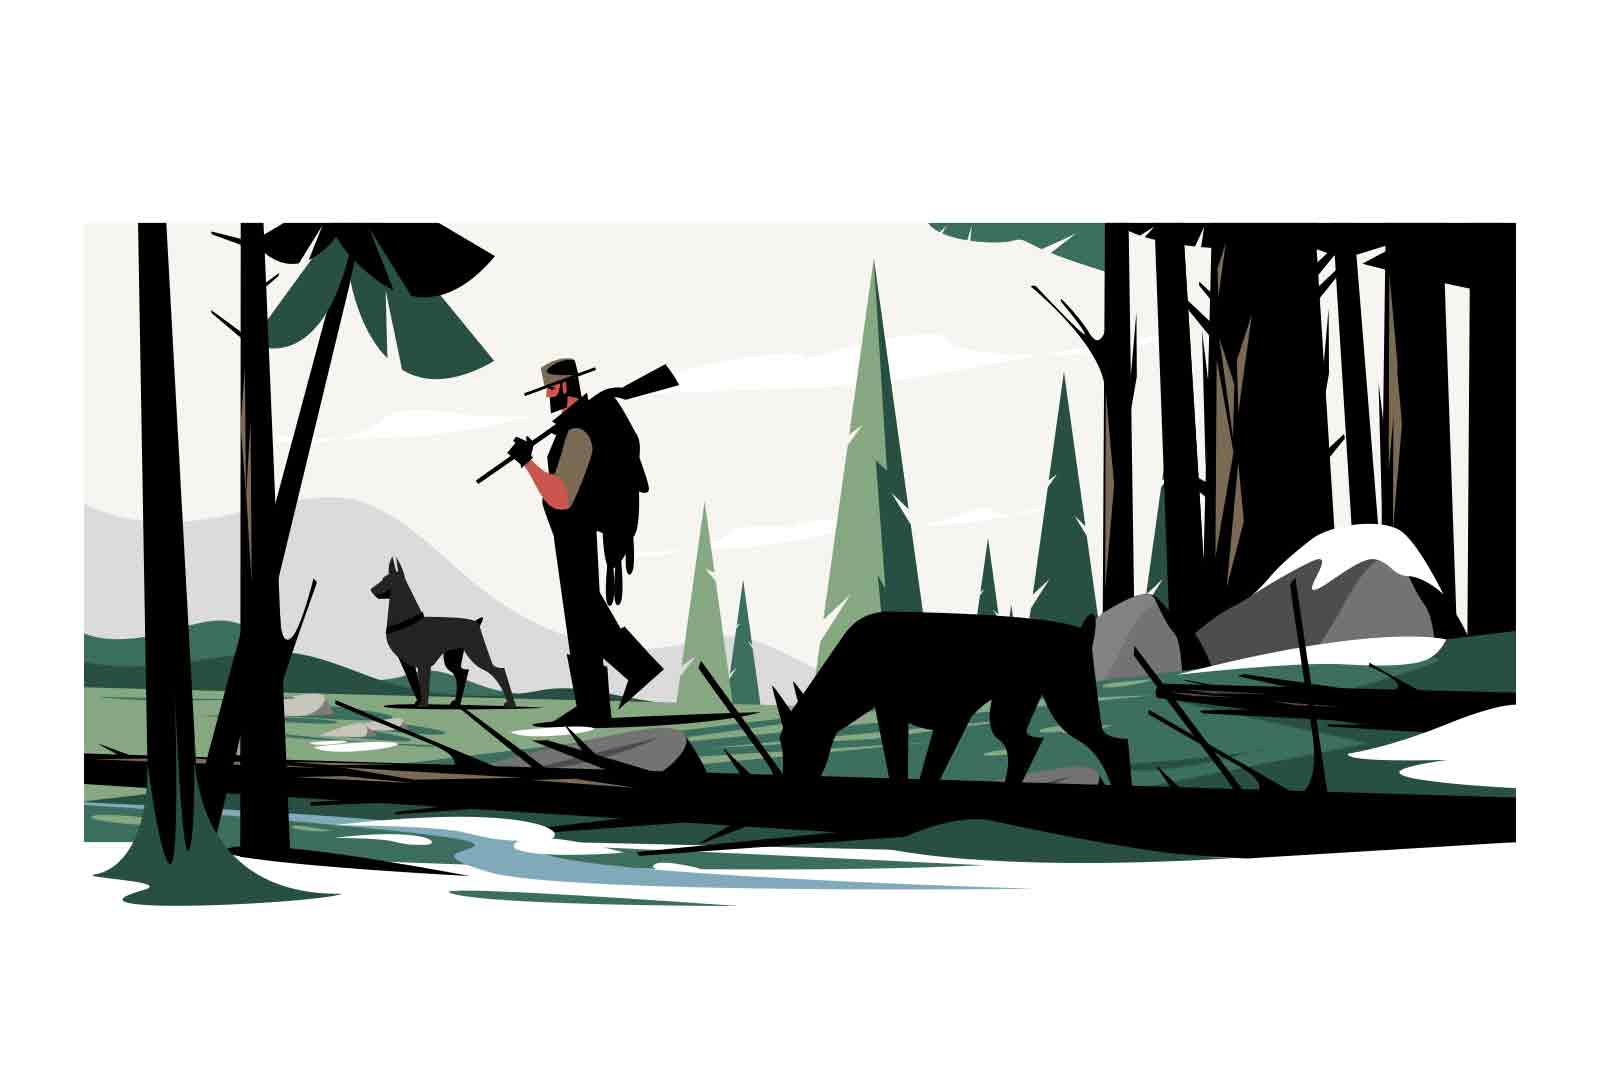 Man hunter with gun on hunting with dogs vector illustration. Huntsman with shotgun in forest flat style design. Hunt concept